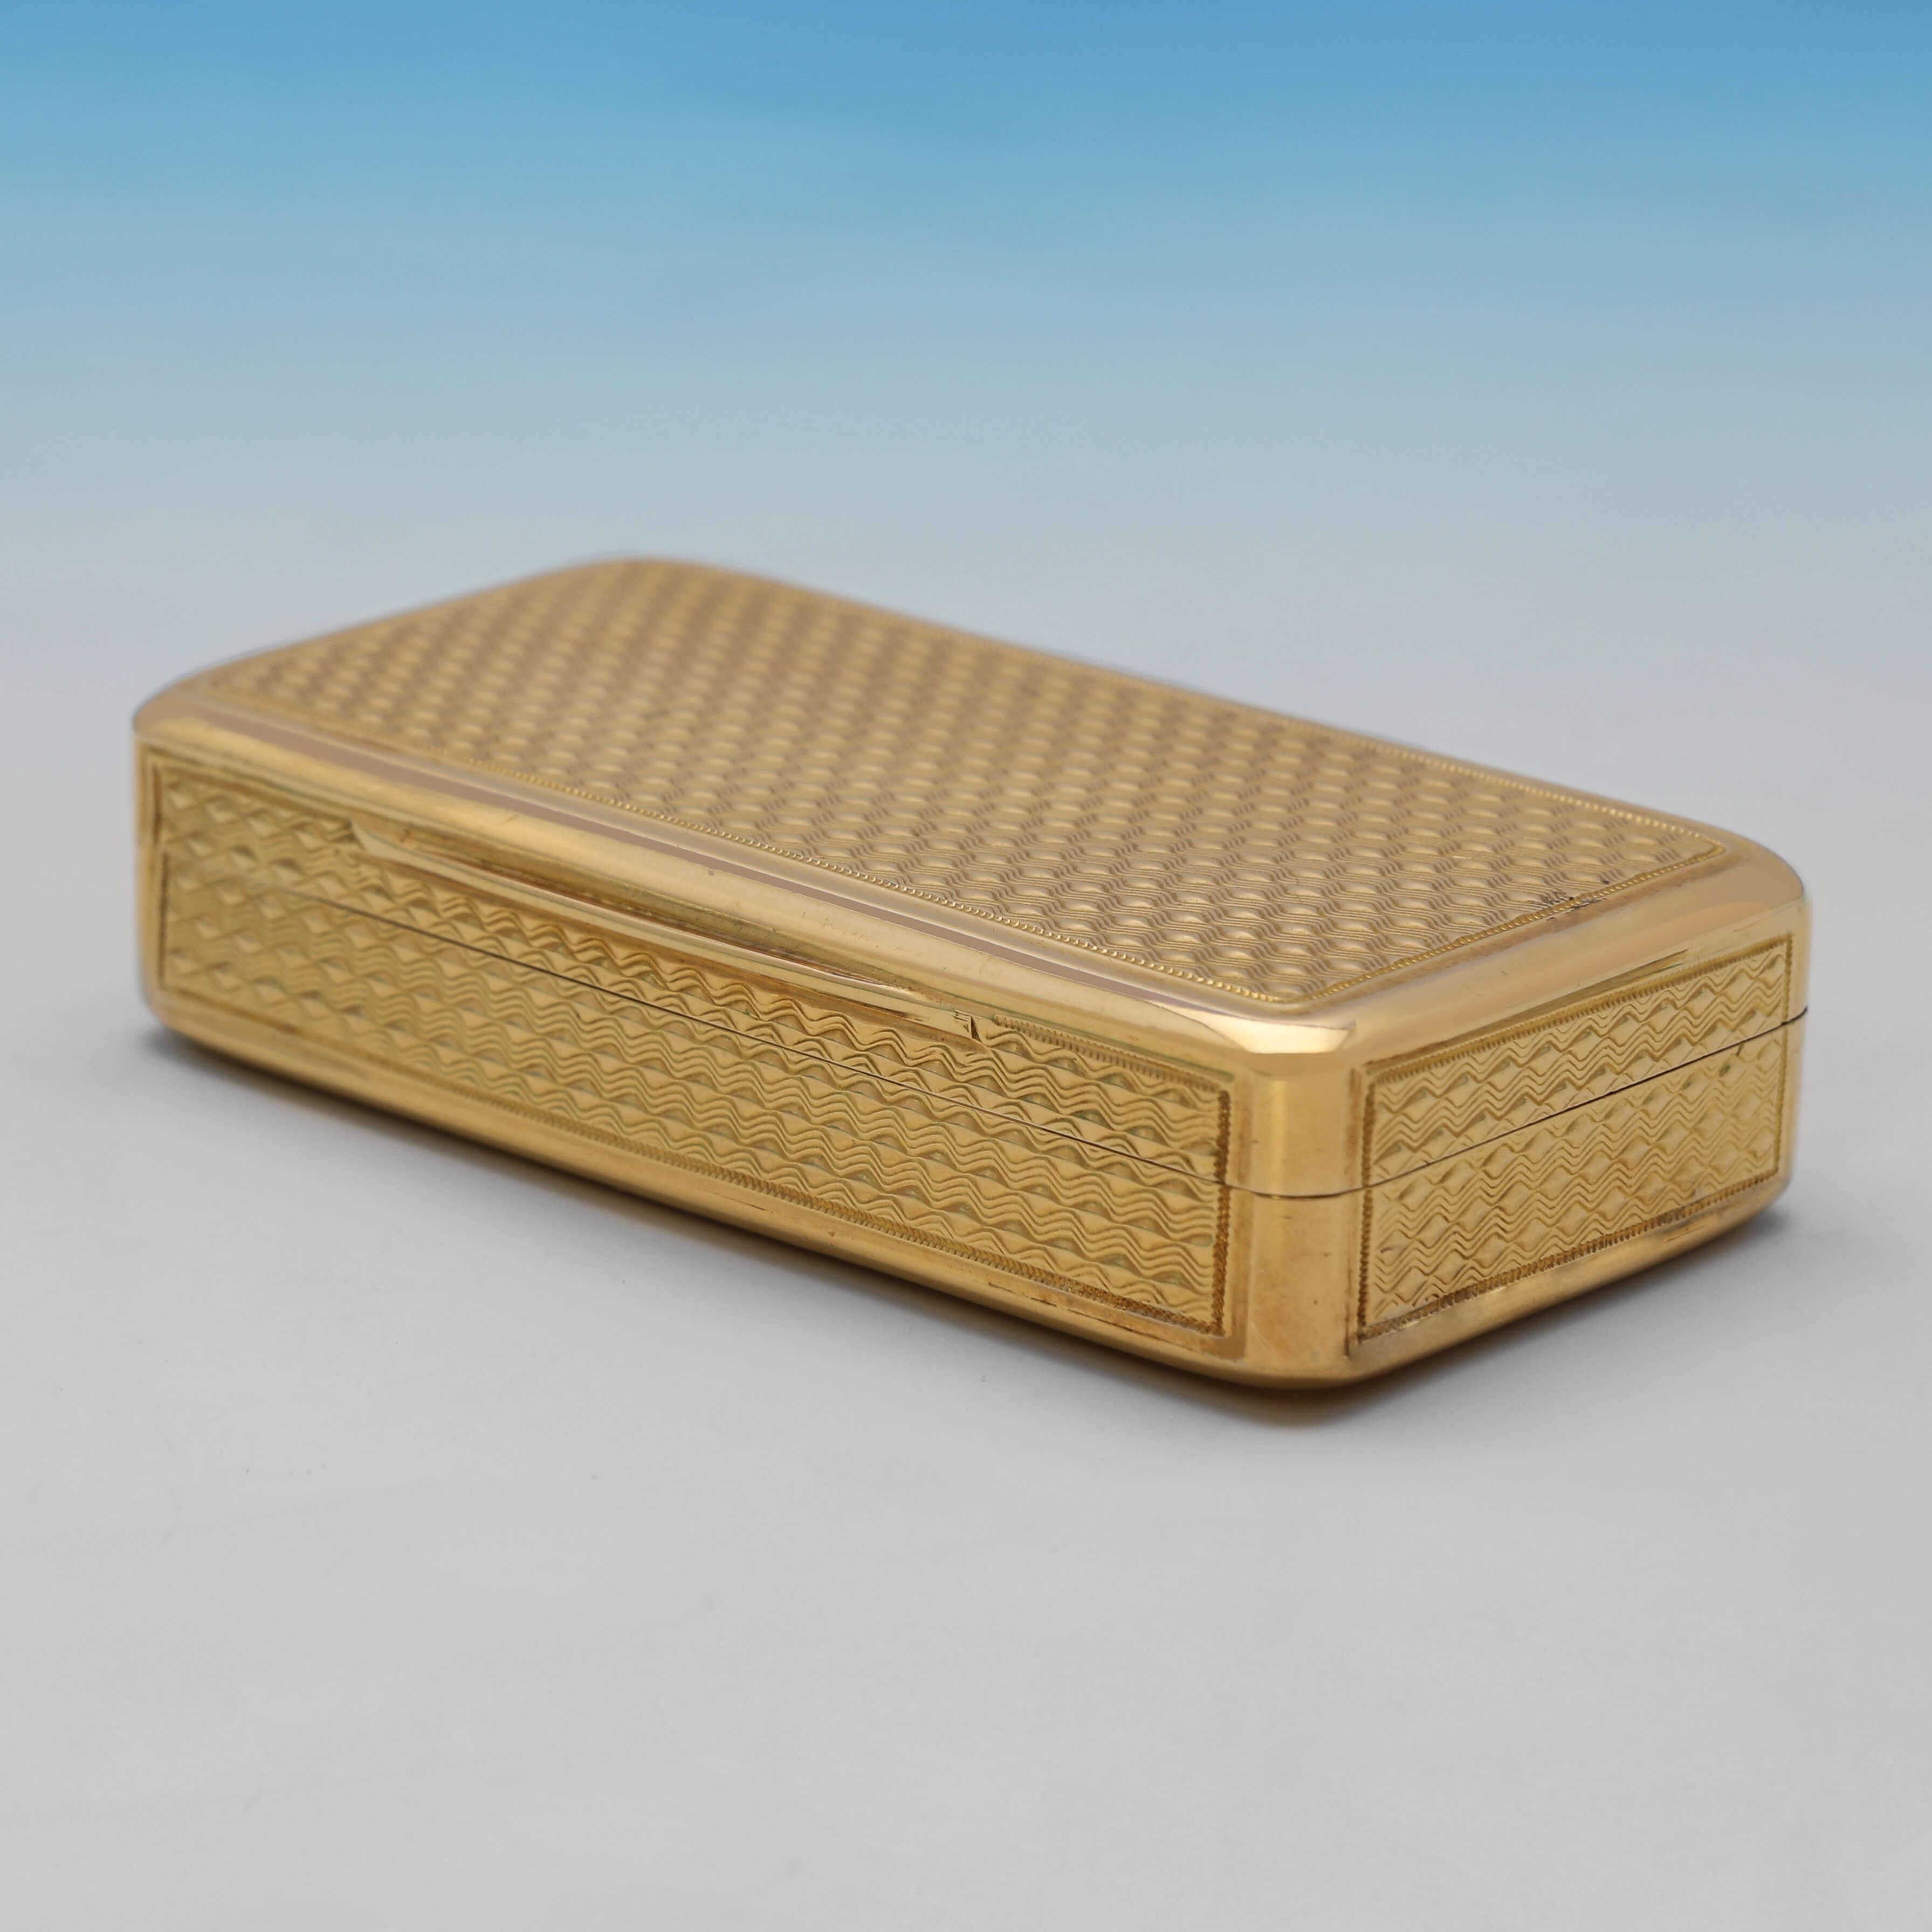 Early 19th Century 18ct Gold Antique English Snuff Box - Hallmarked in London in 1803 - 54.9g For Sale